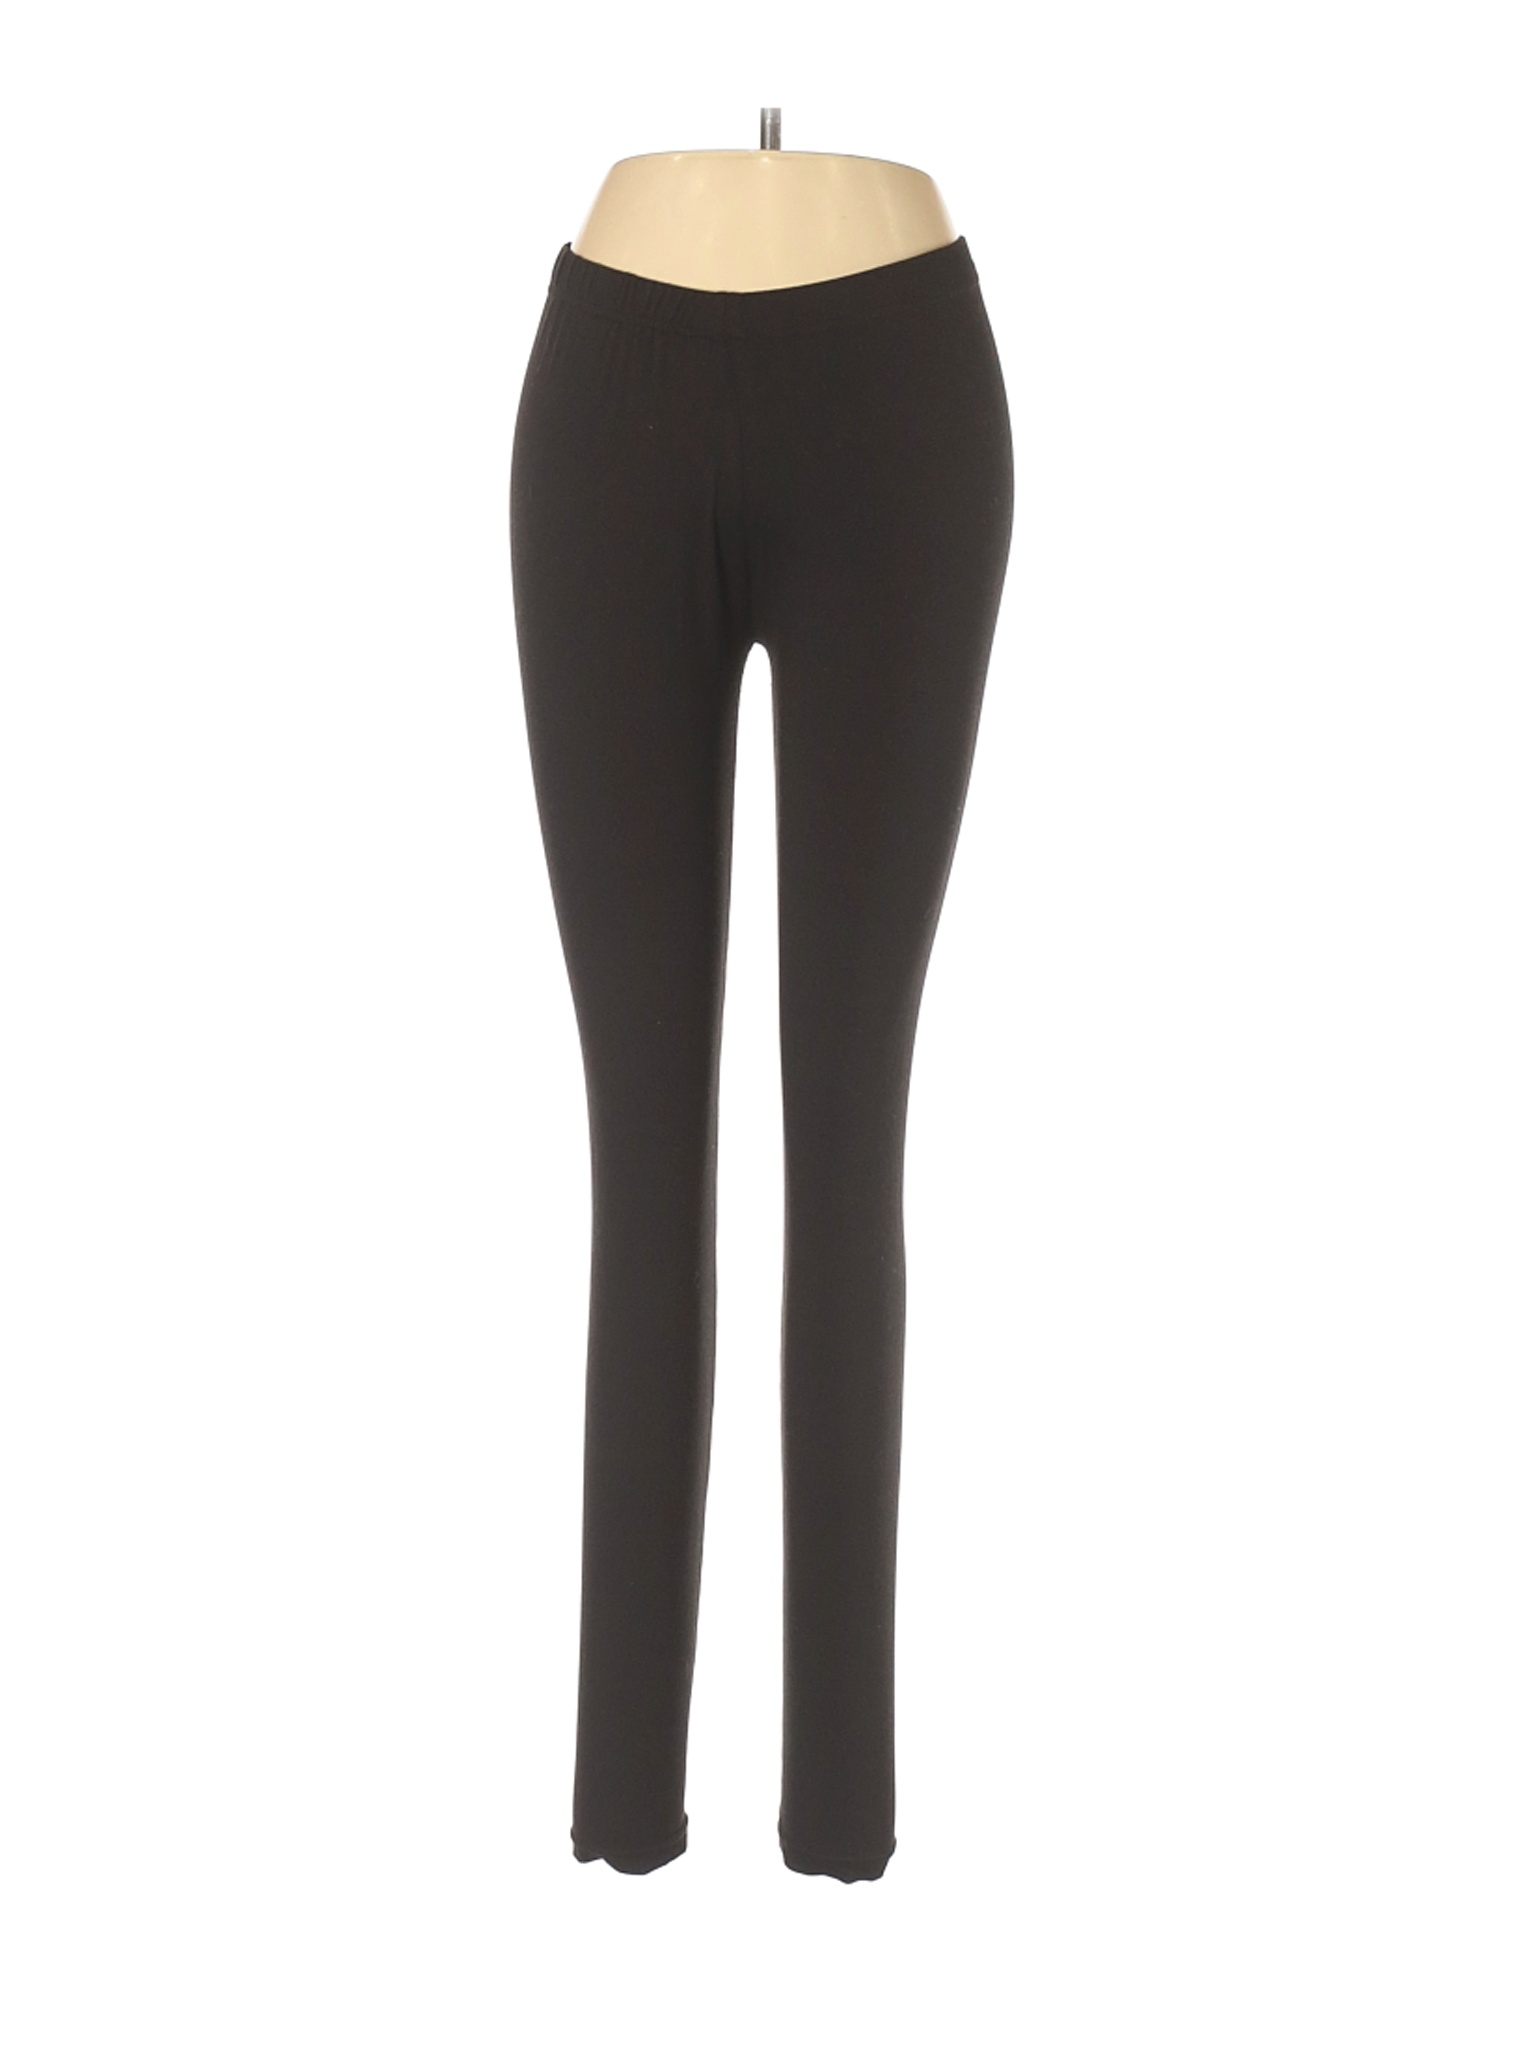 Petite Plus Size Leggings For Women  International Society of Precision  Agriculture